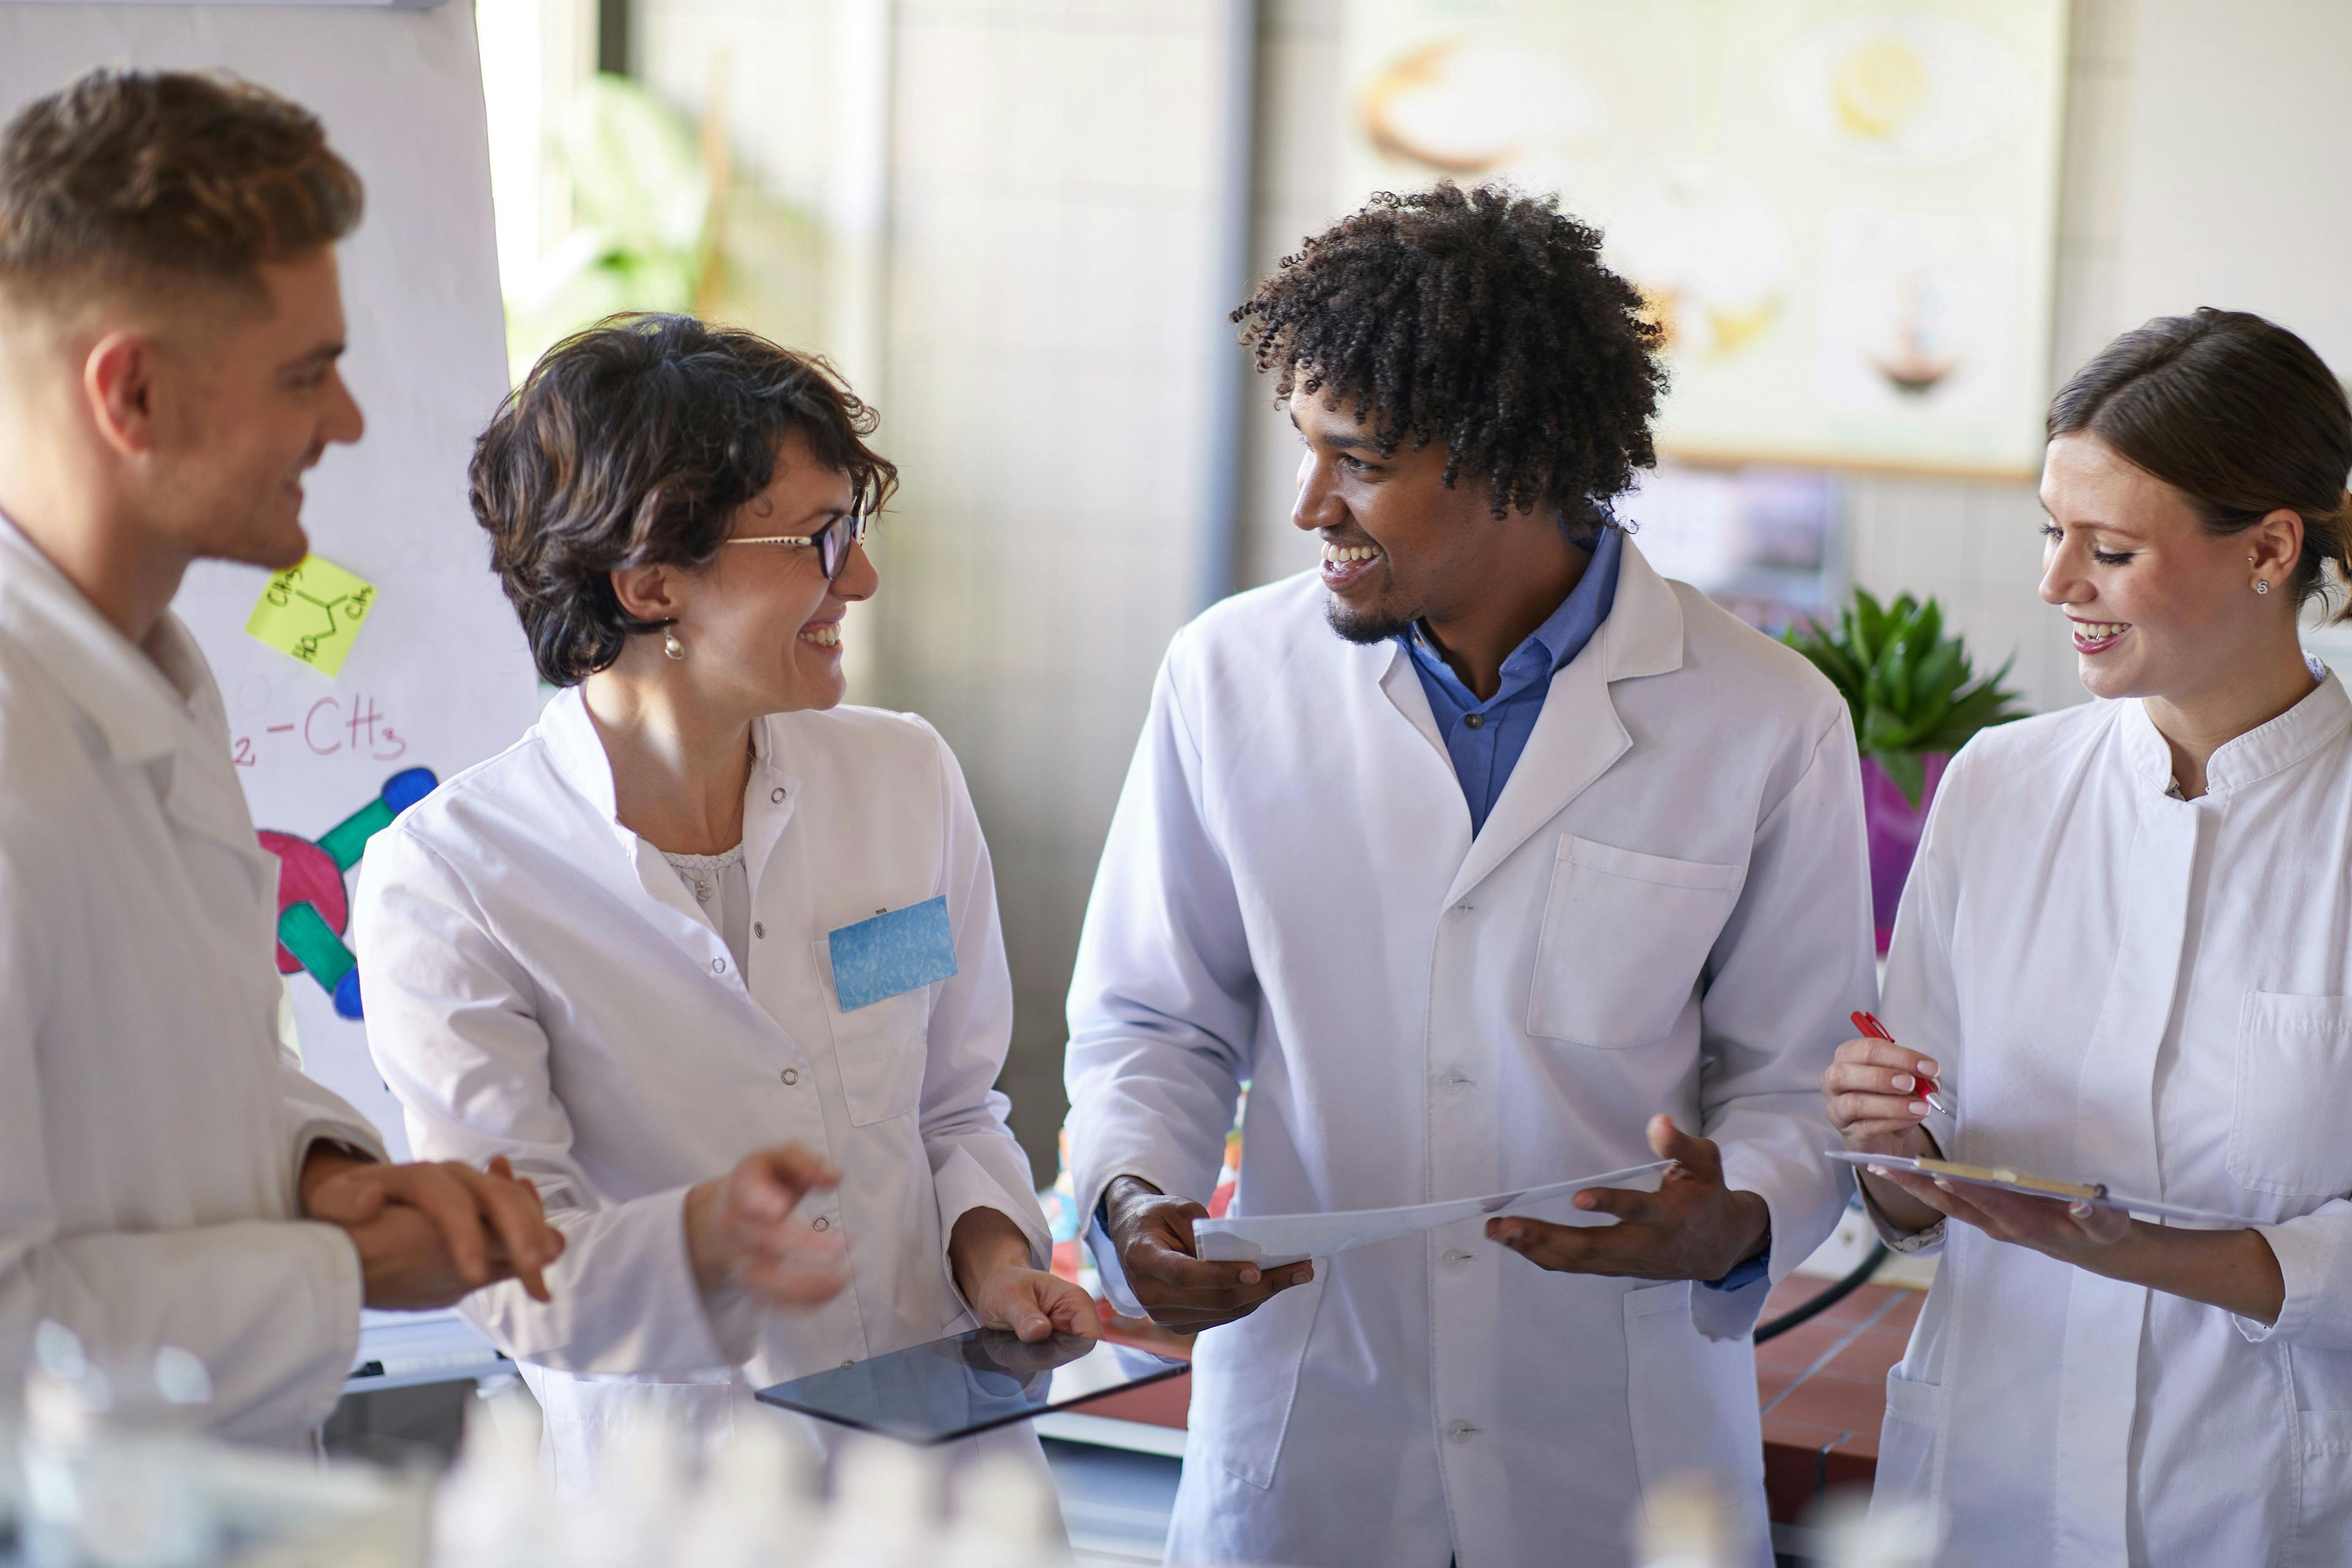 Medical students listening to a lecture in the lab | Image Credit: luckybusiness - stock.adobe.com